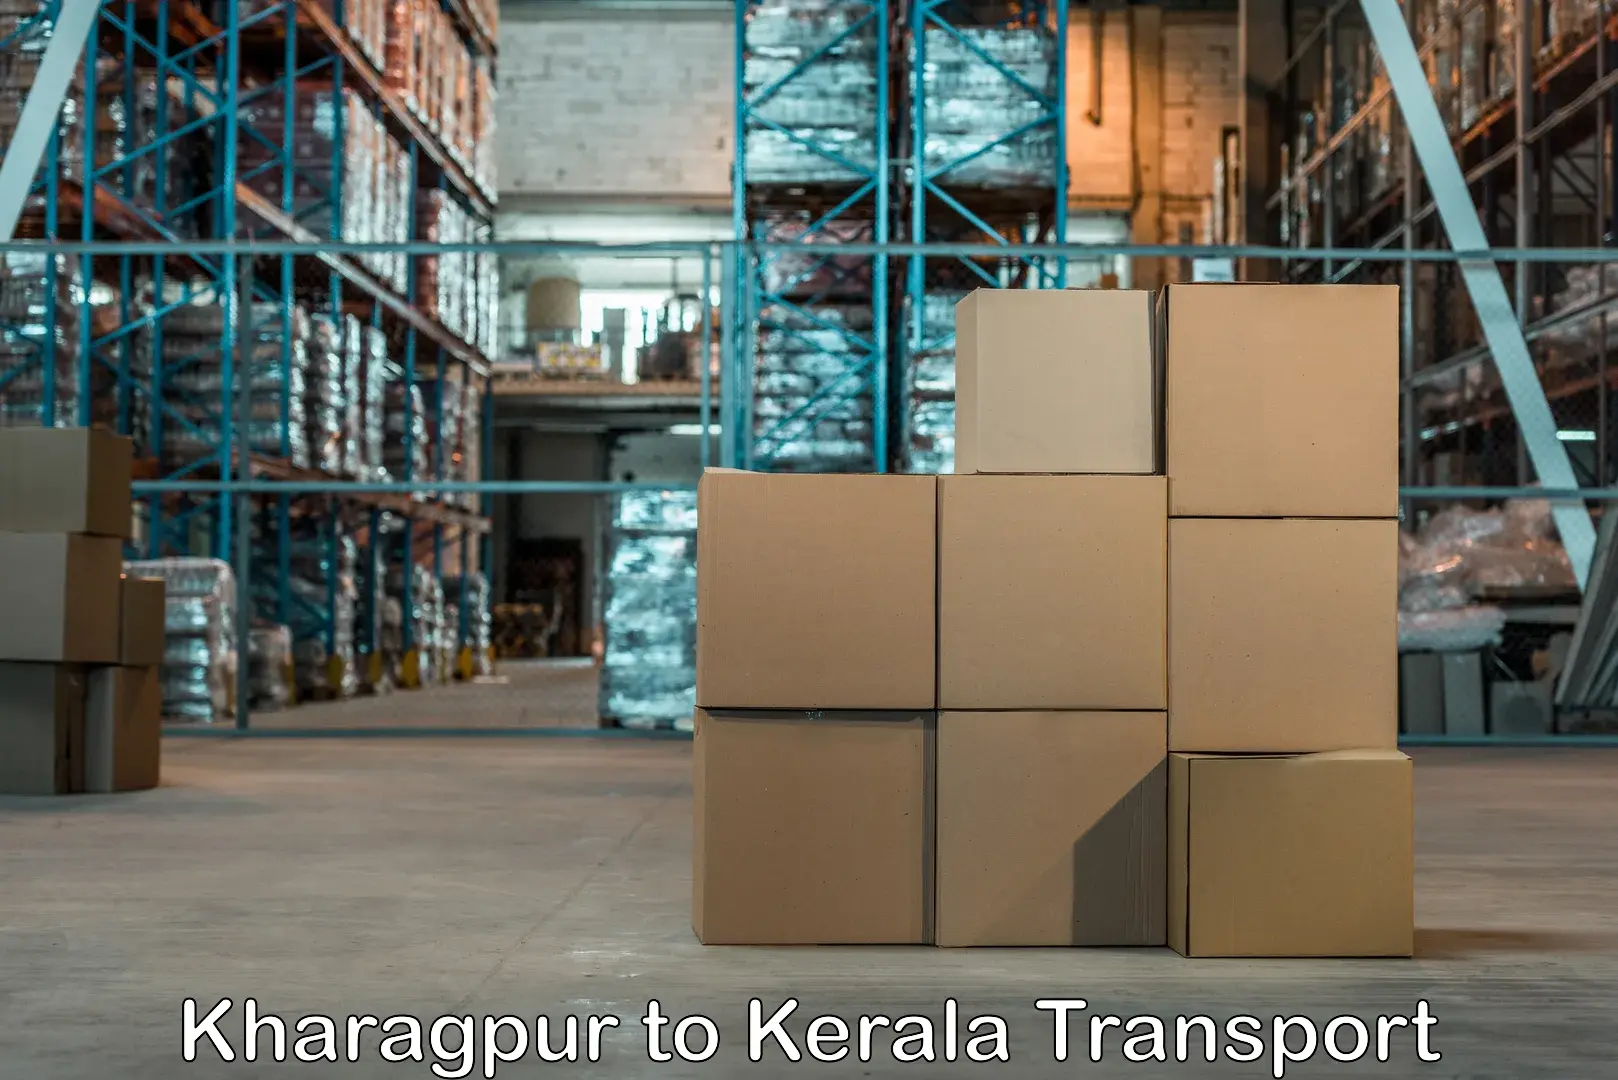 Delivery service Kharagpur to Kerala